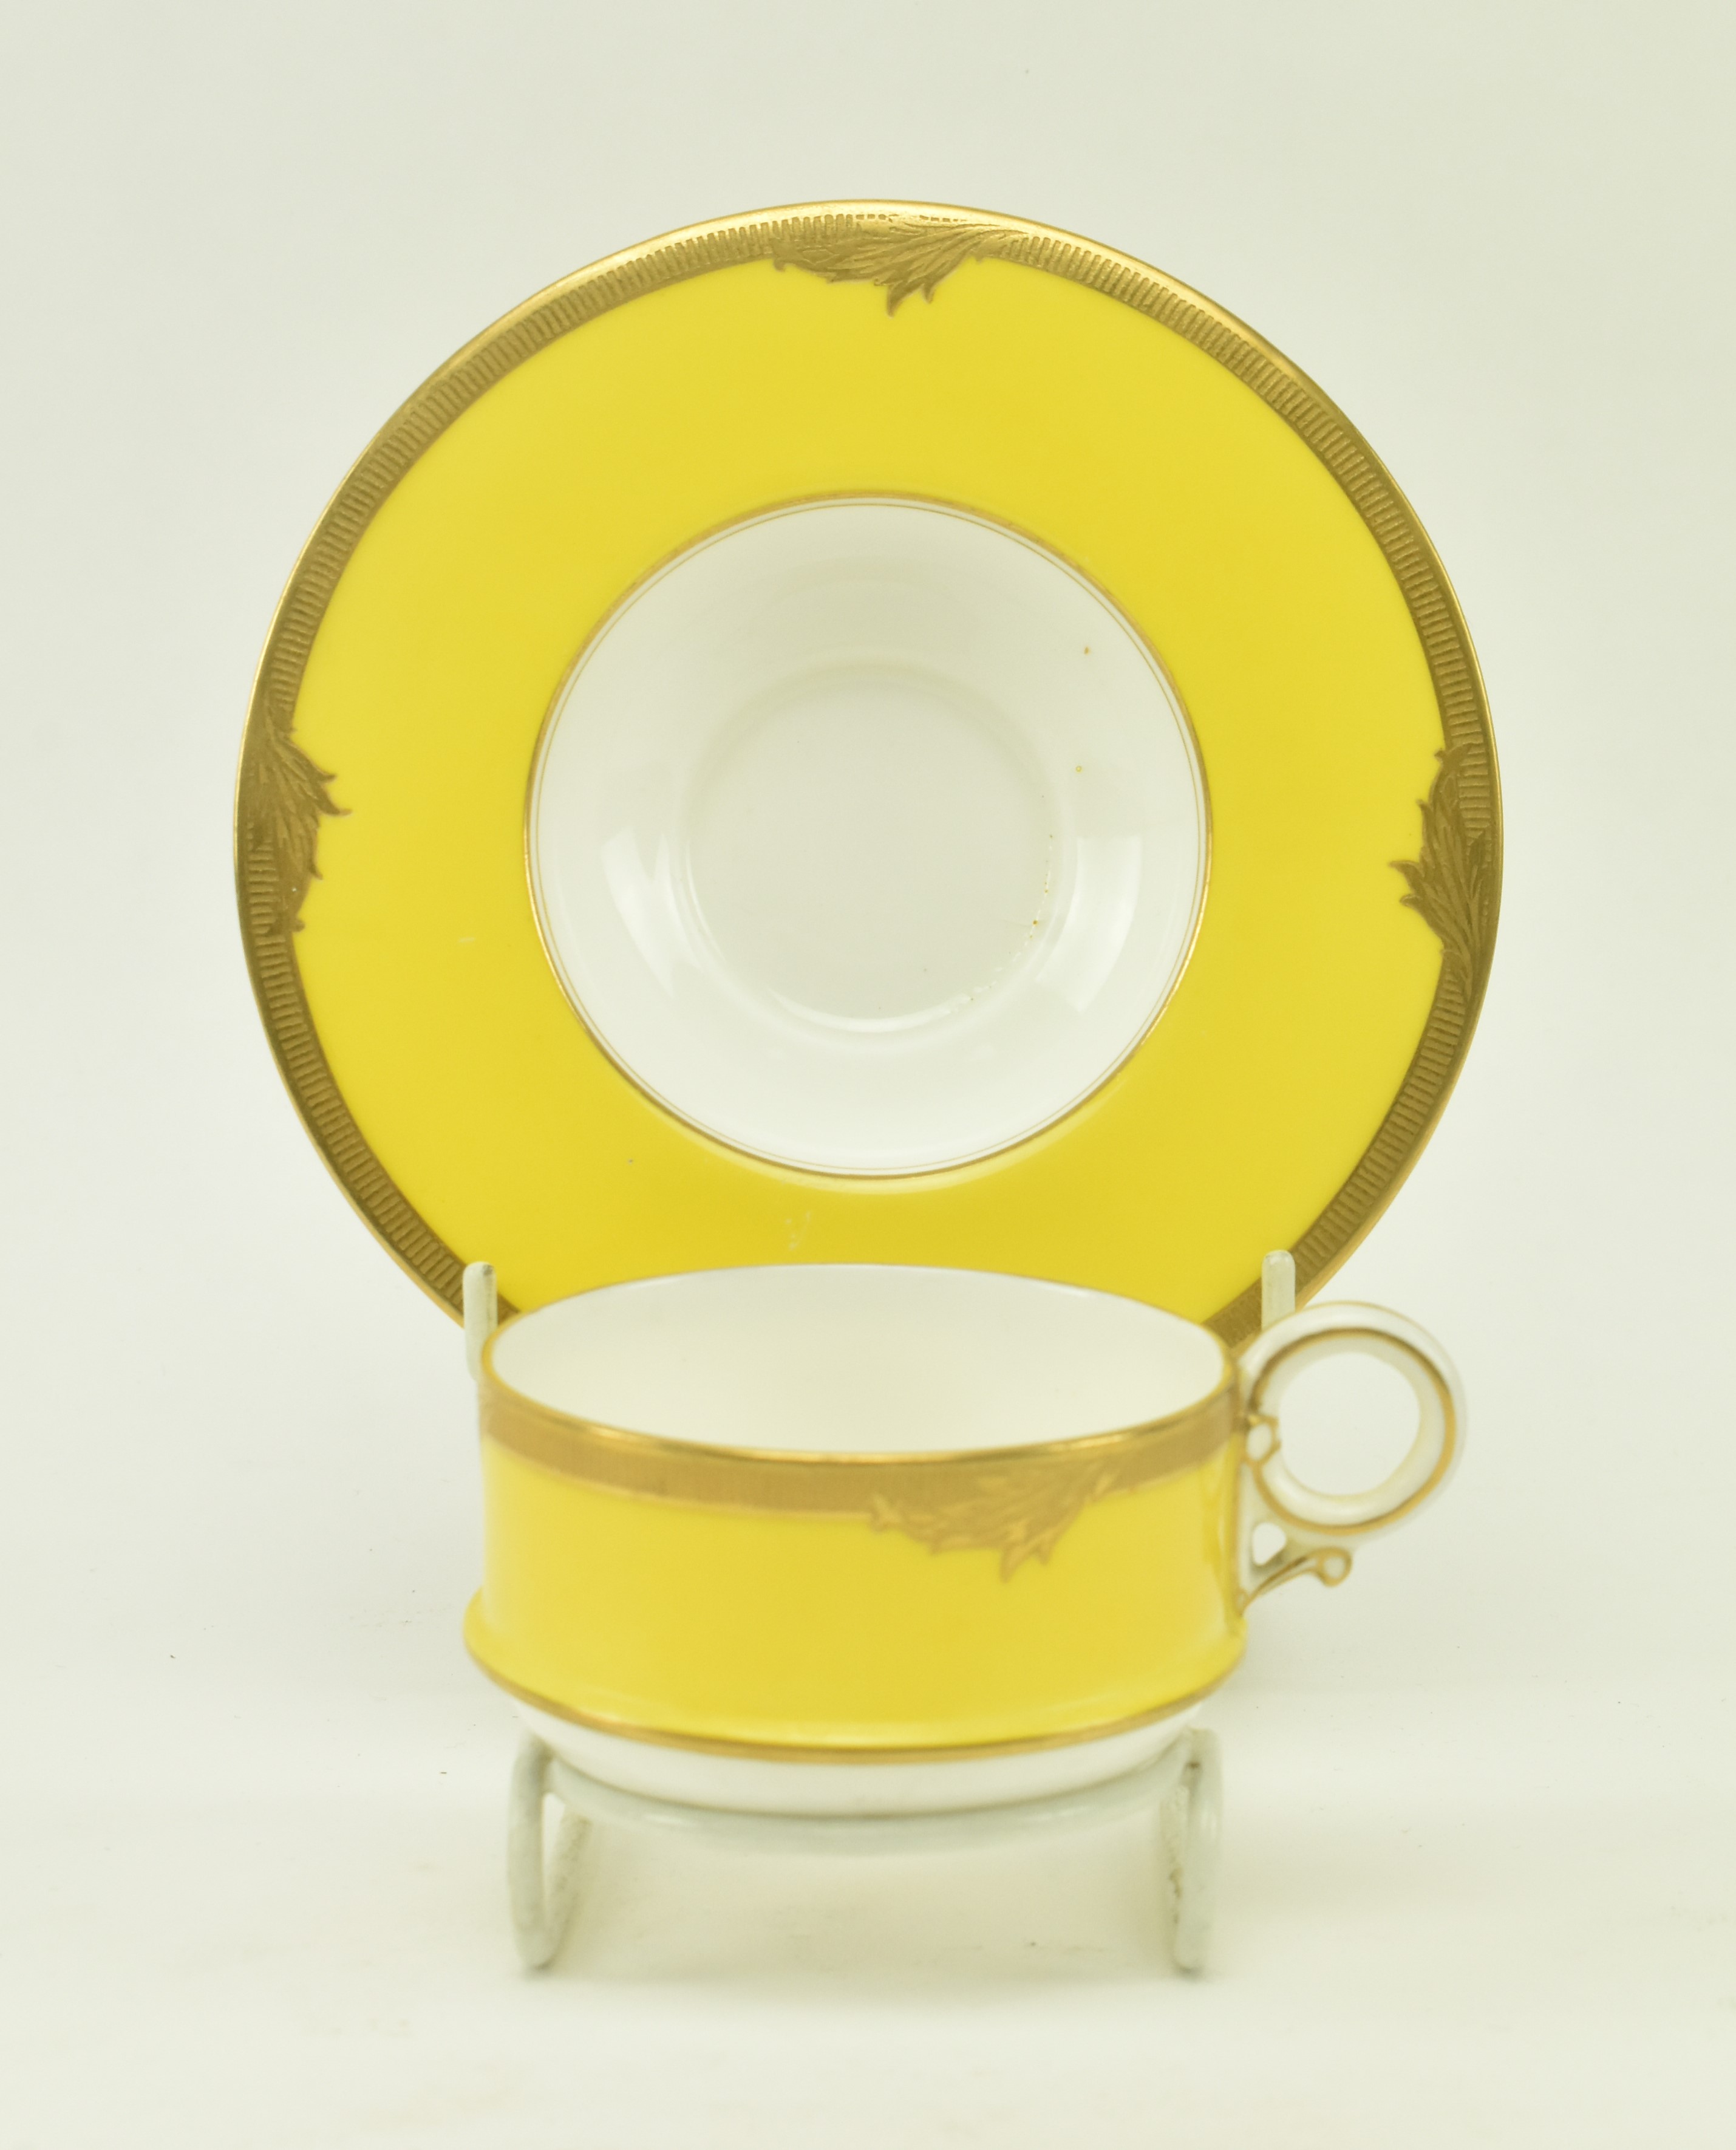 EARLY 20TH CENTURY ROYAL WORCESTER YELLOW TEACUP & SAUCER - Image 2 of 7